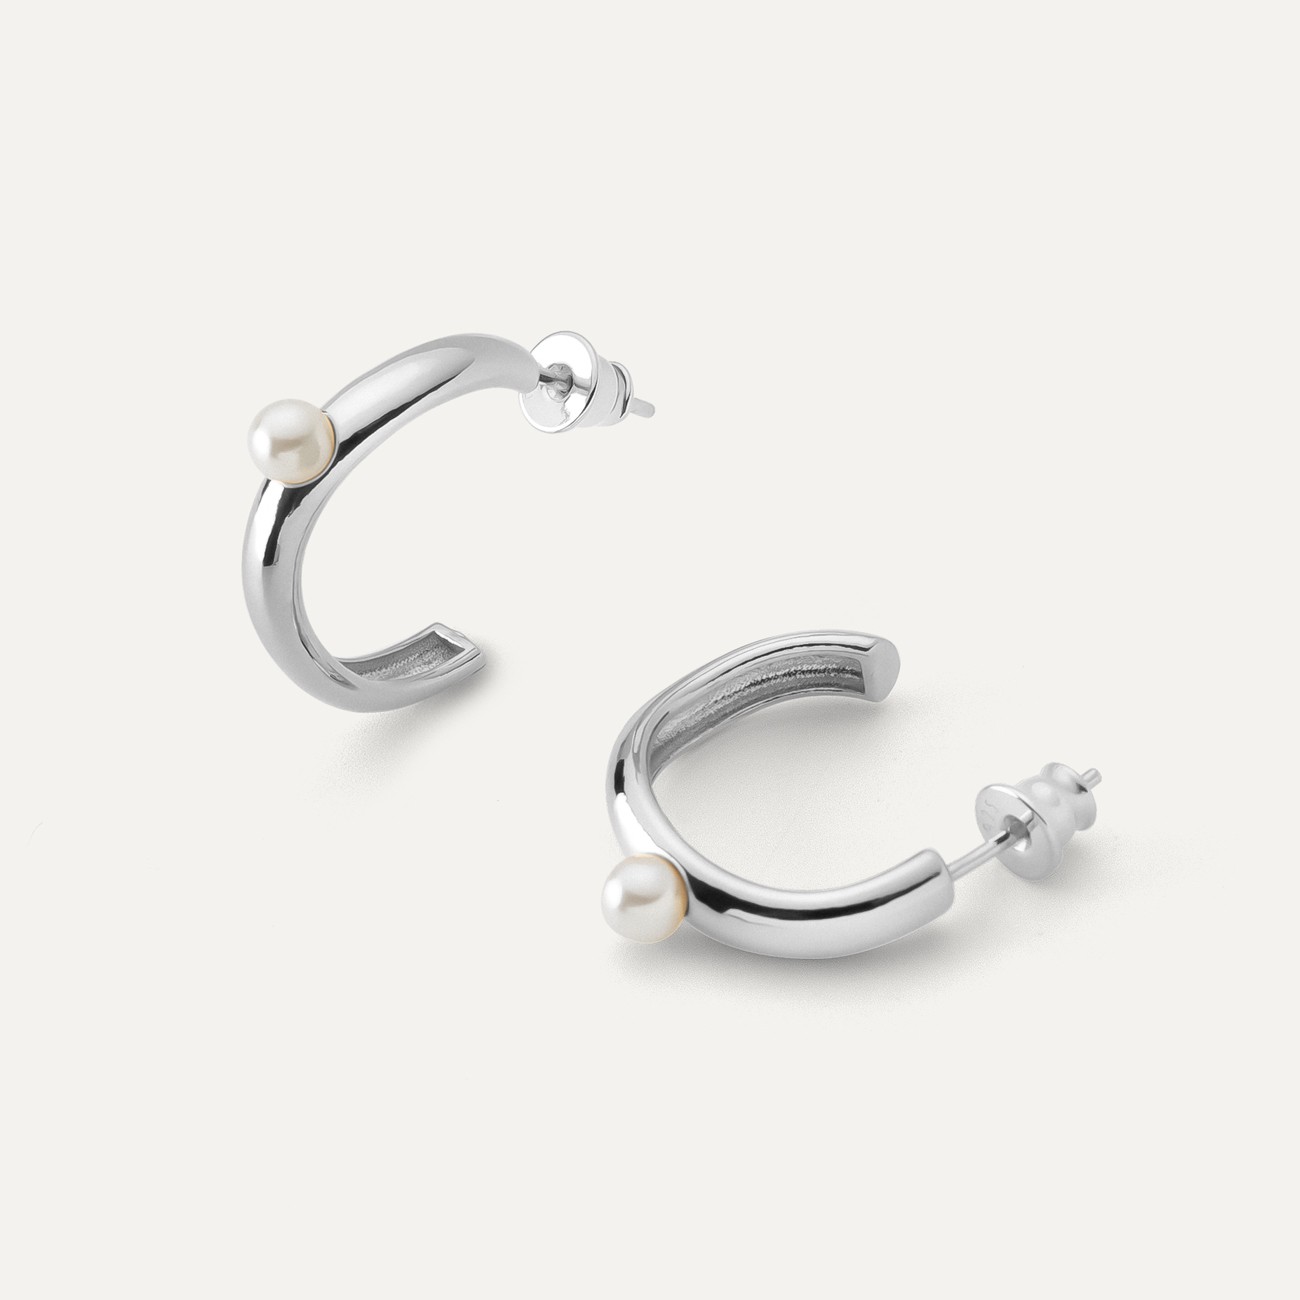 Silver semicircle earrings with pearl, sterling silver 925